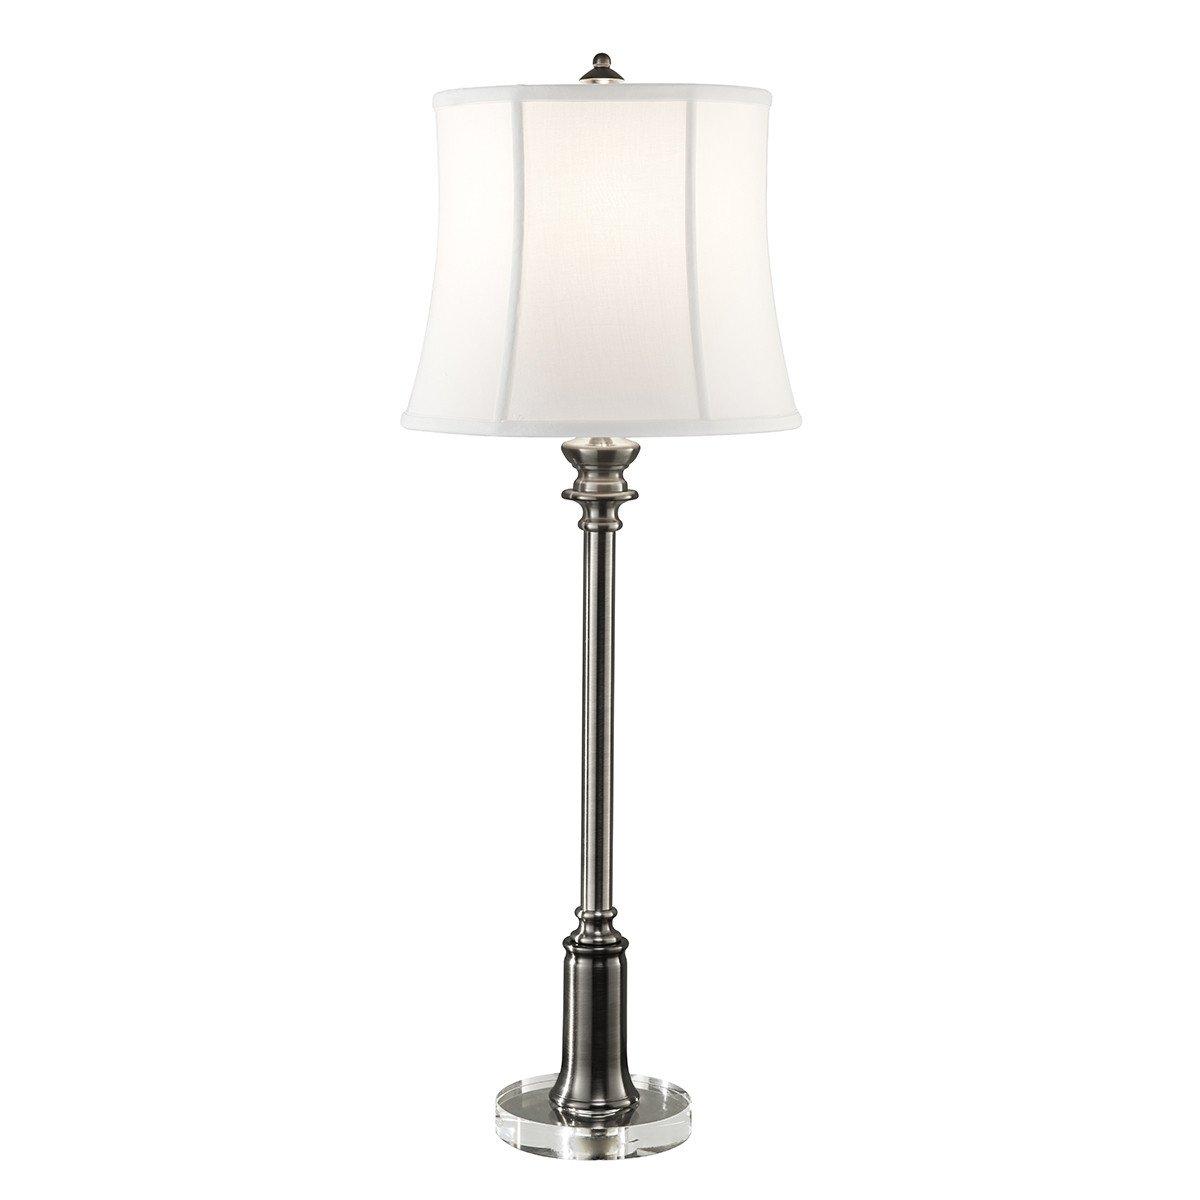 Stateroom 1 Light Table Lamp Antique Nickel E27